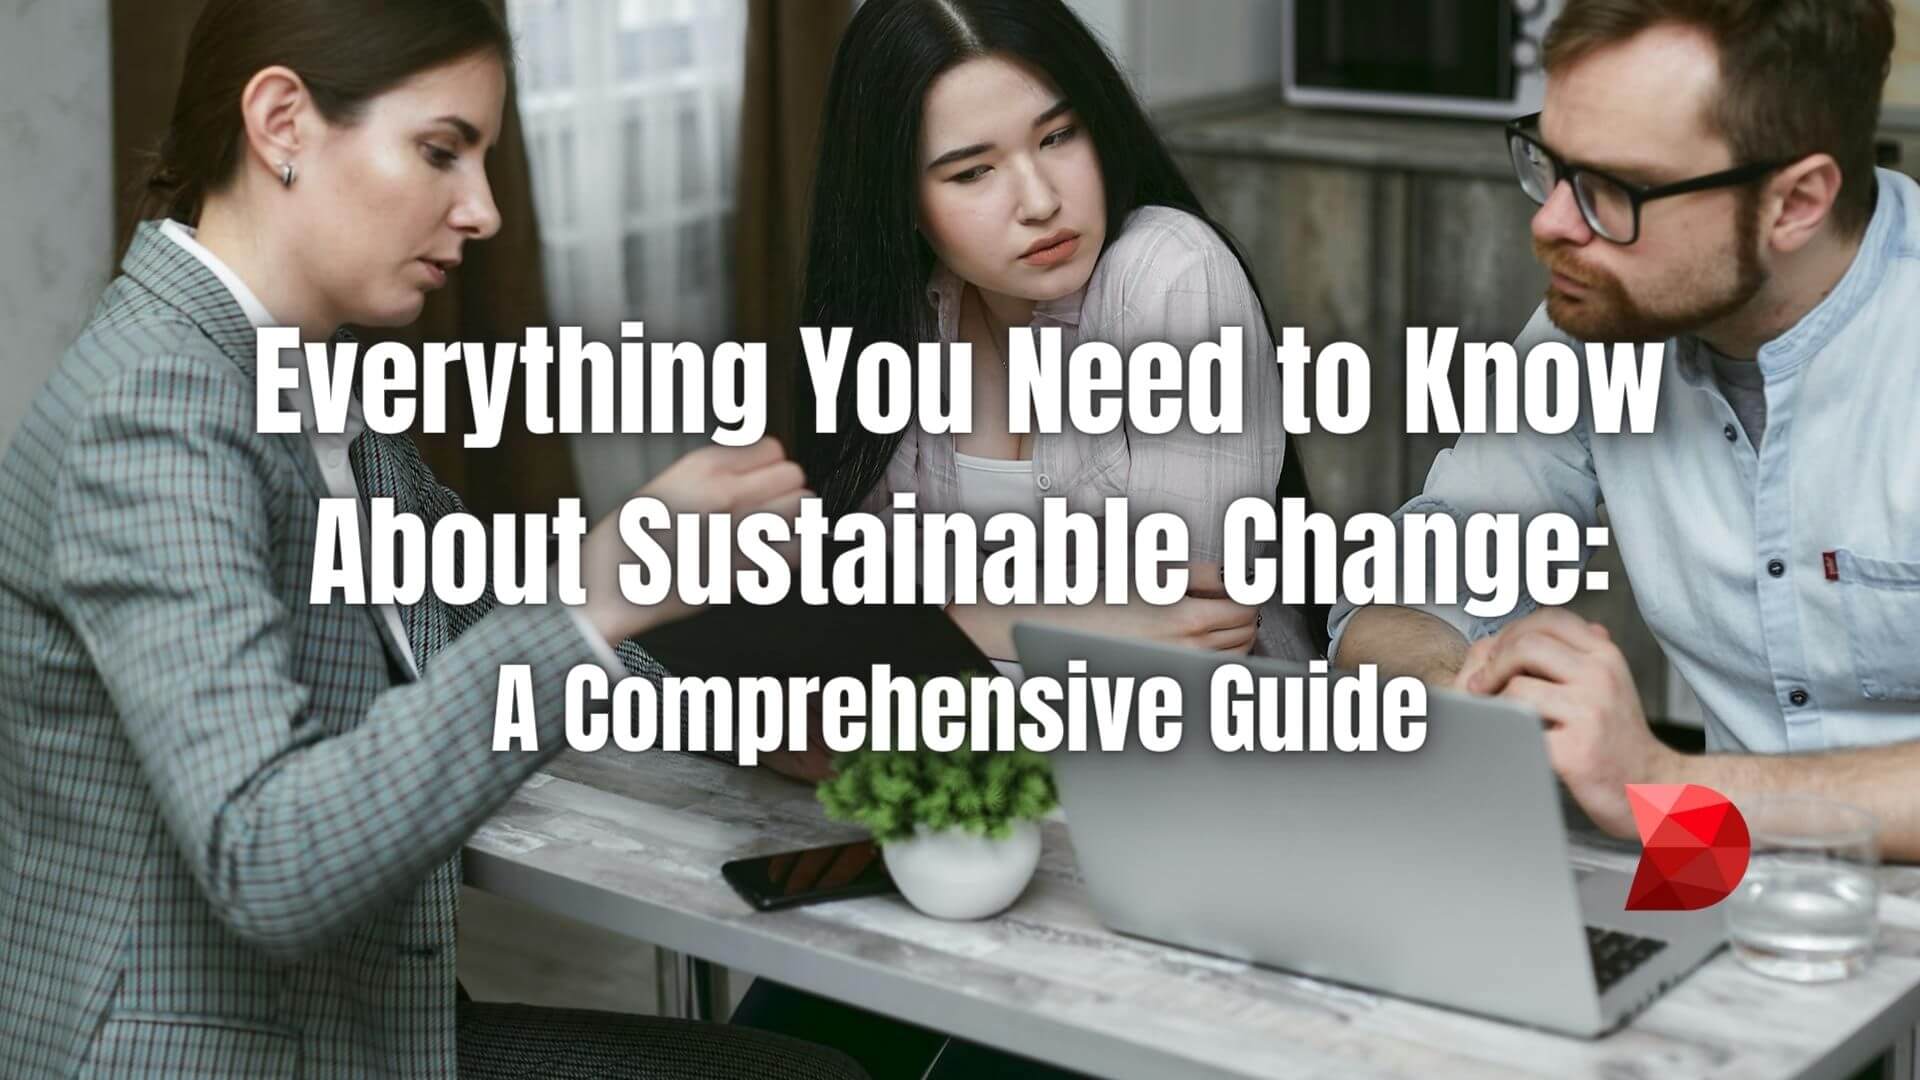 Unlock the secrets of sustainable change with our comprehensive guide. Learn practical strategies for lasting transformation today!